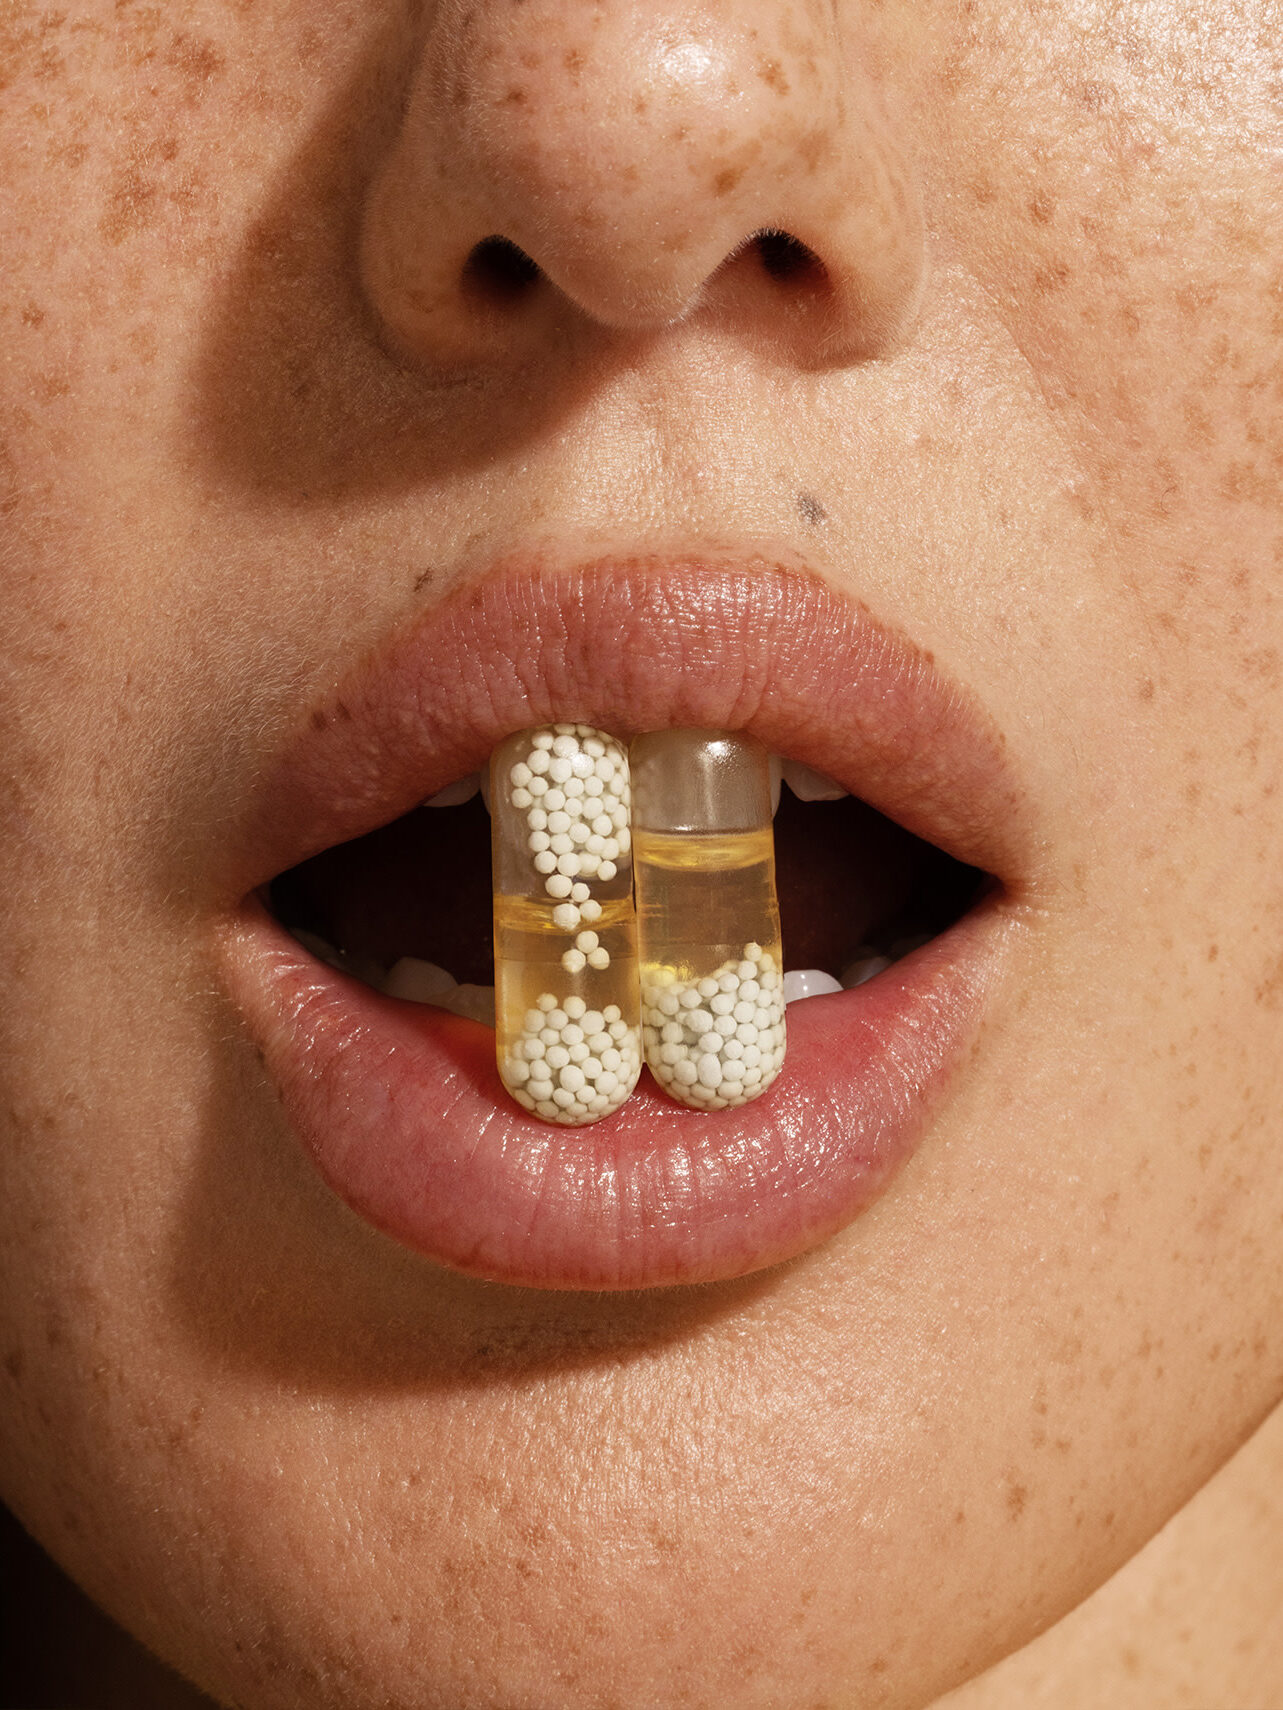 A close up of a model holding up two Ritual multivitamin capsules between their teeth.